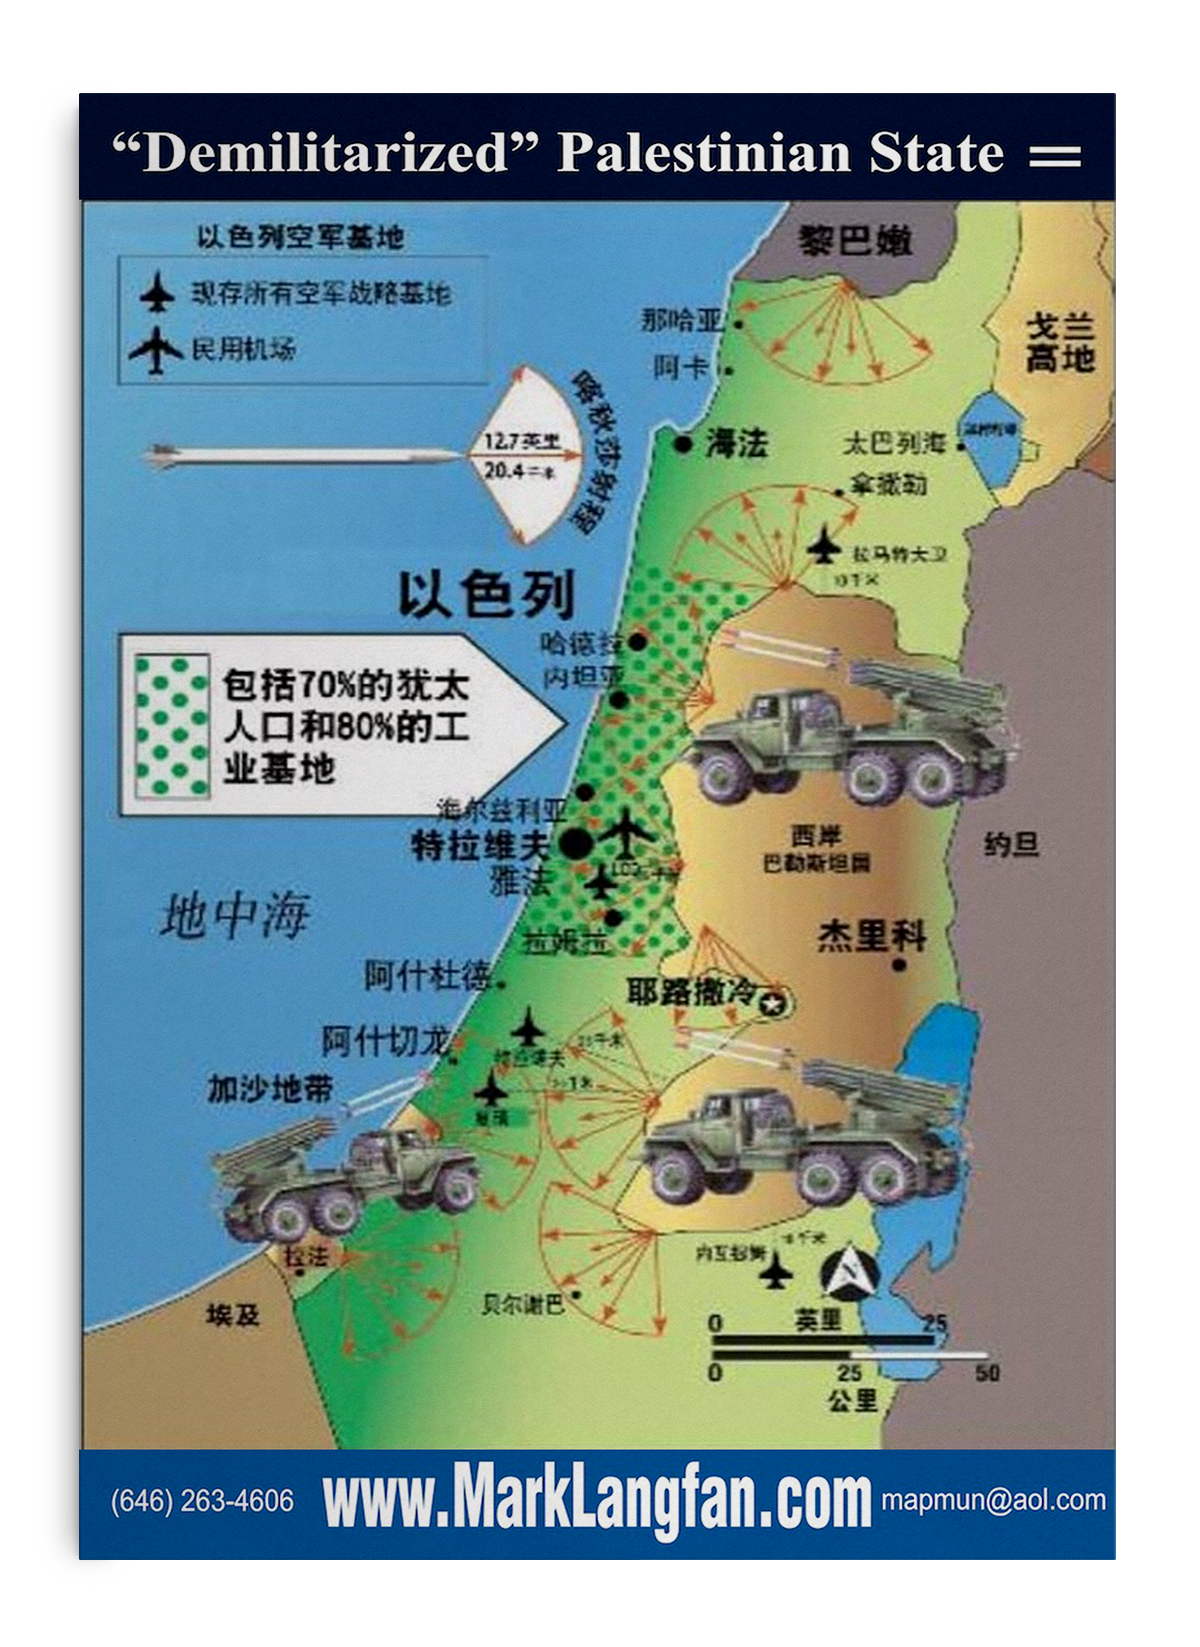 demilitarized palestinian state chinese